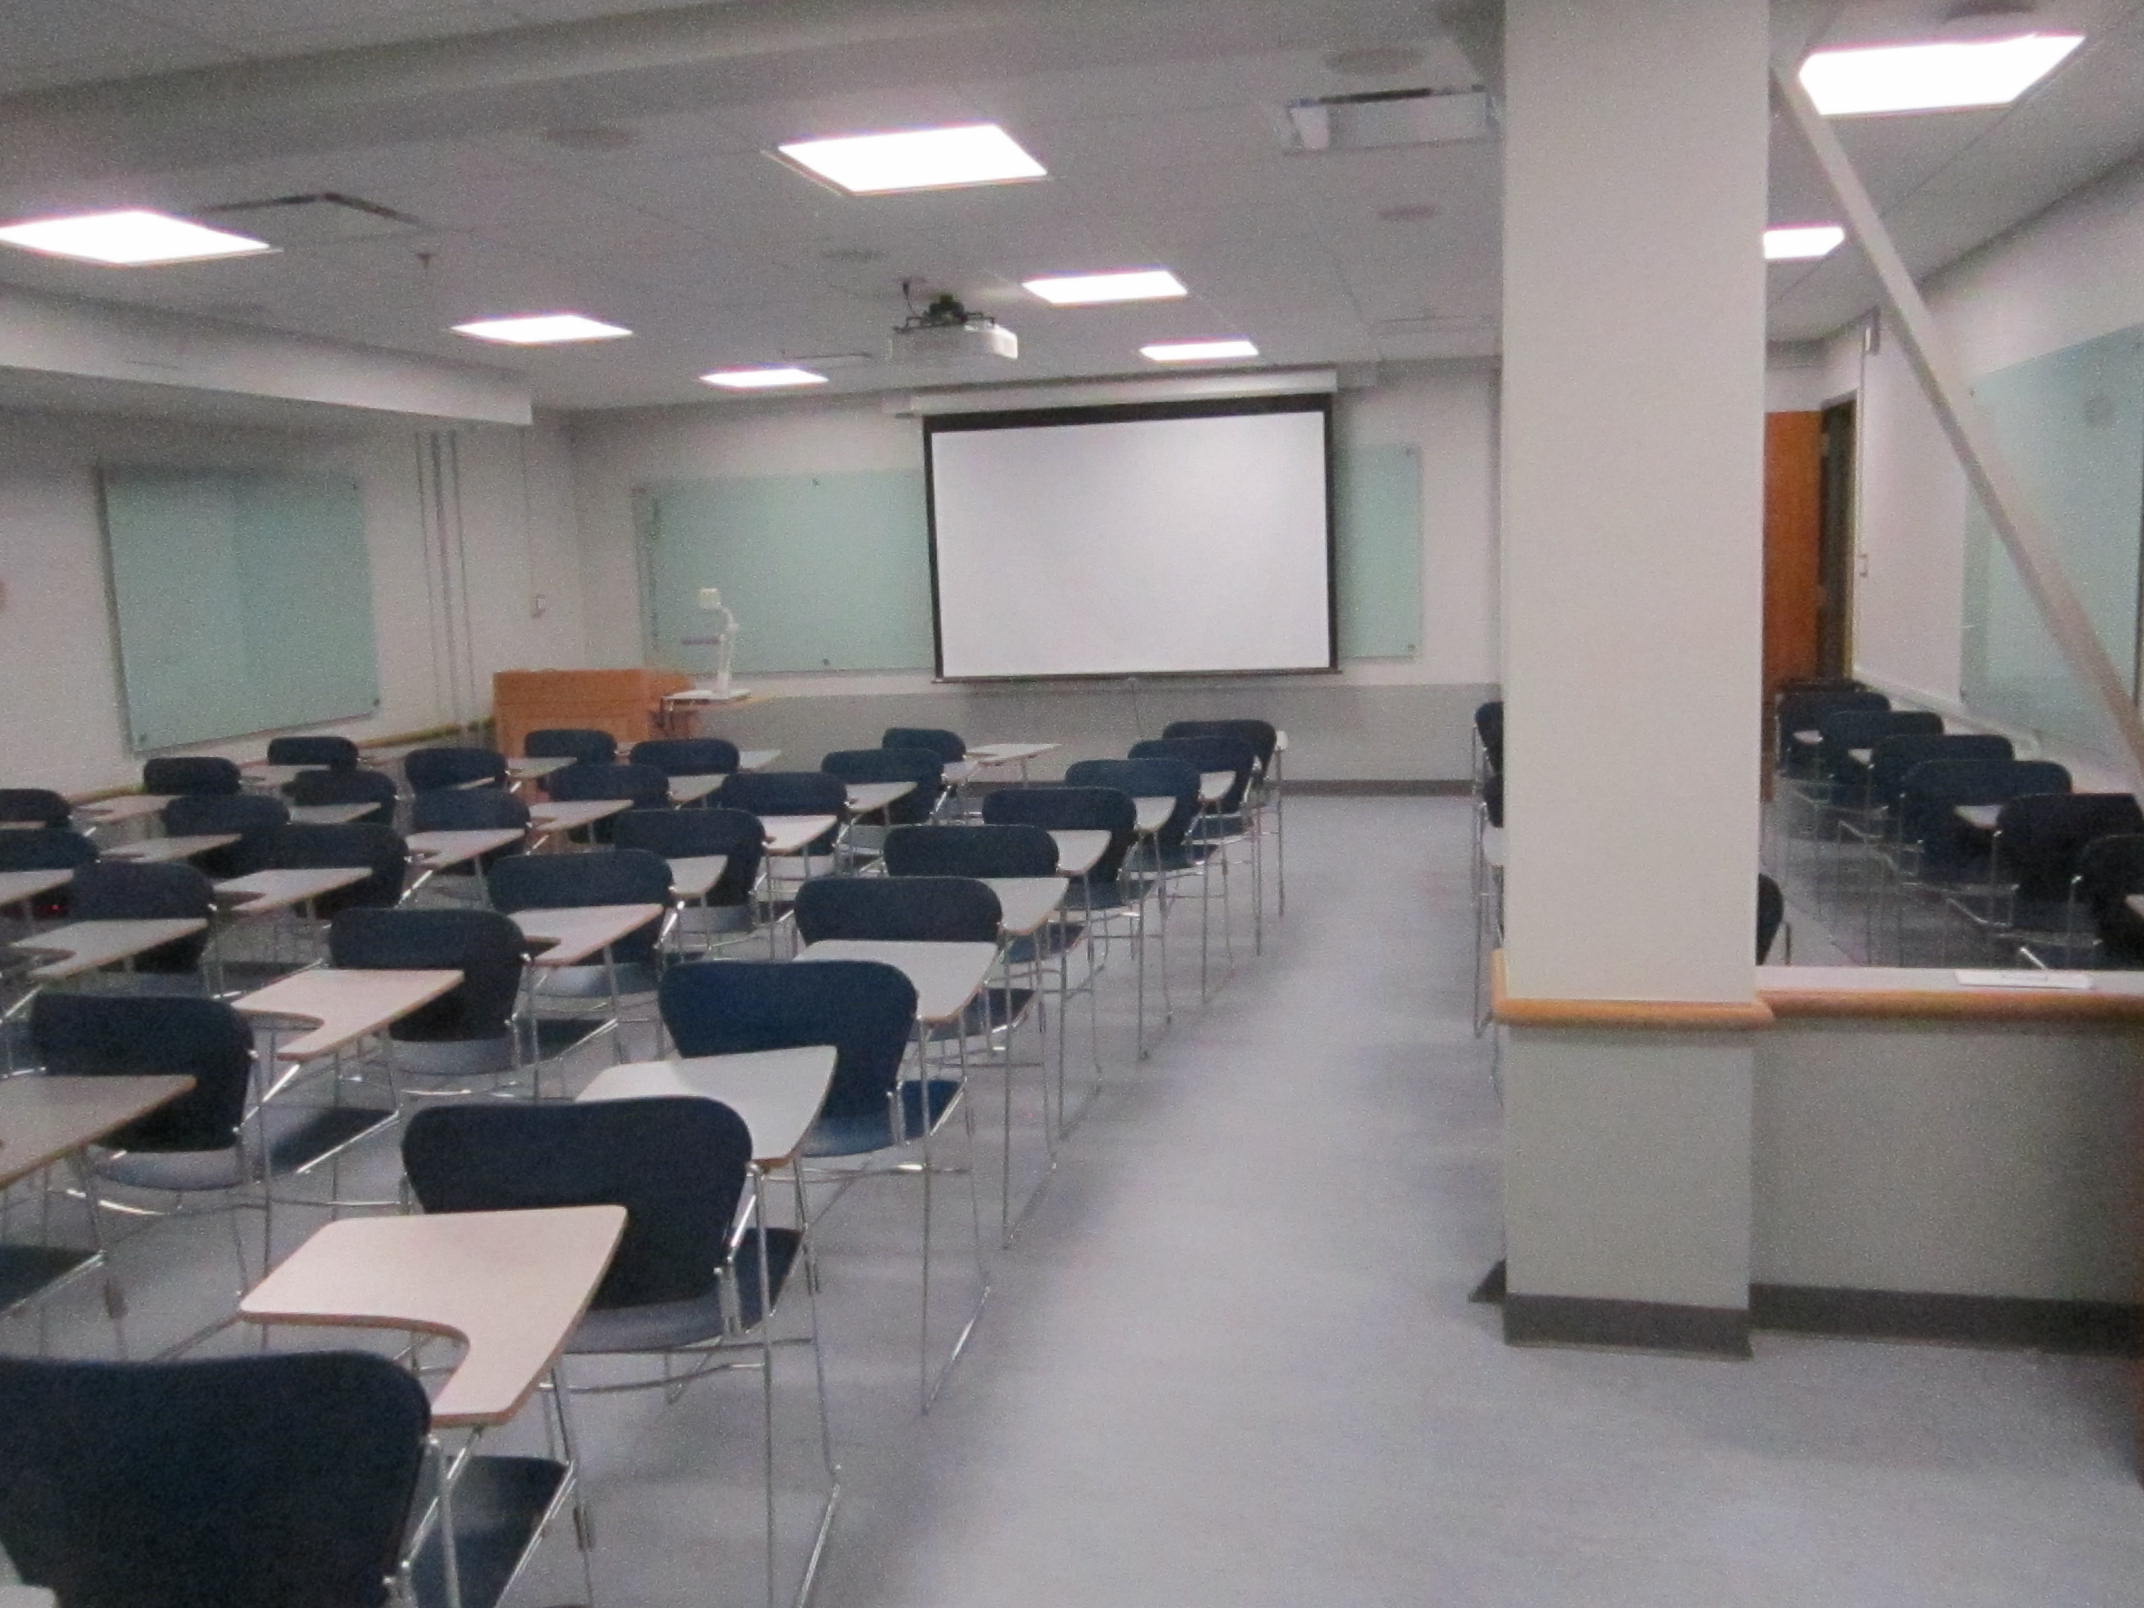 A view of the classroom with movable tablet arm chairs and whiteboards in front.